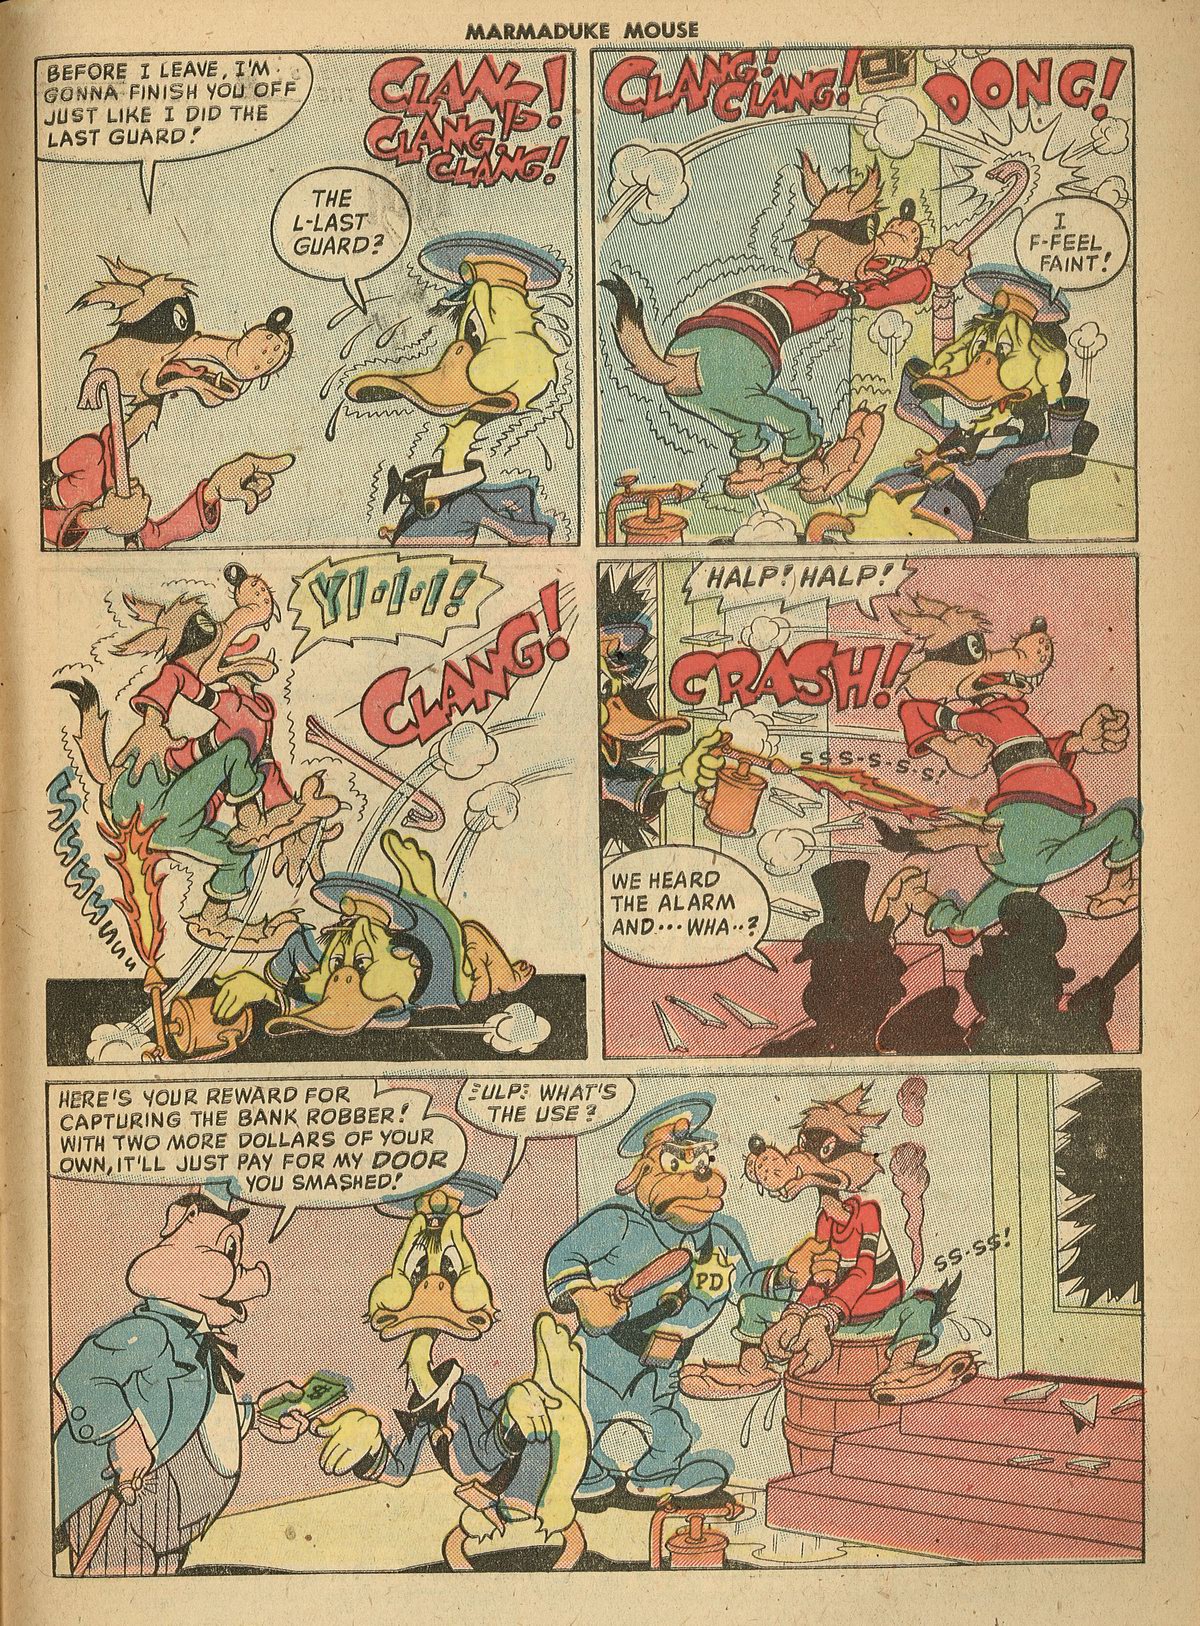 Read online Marmaduke Mouse comic -  Issue #13 - 33